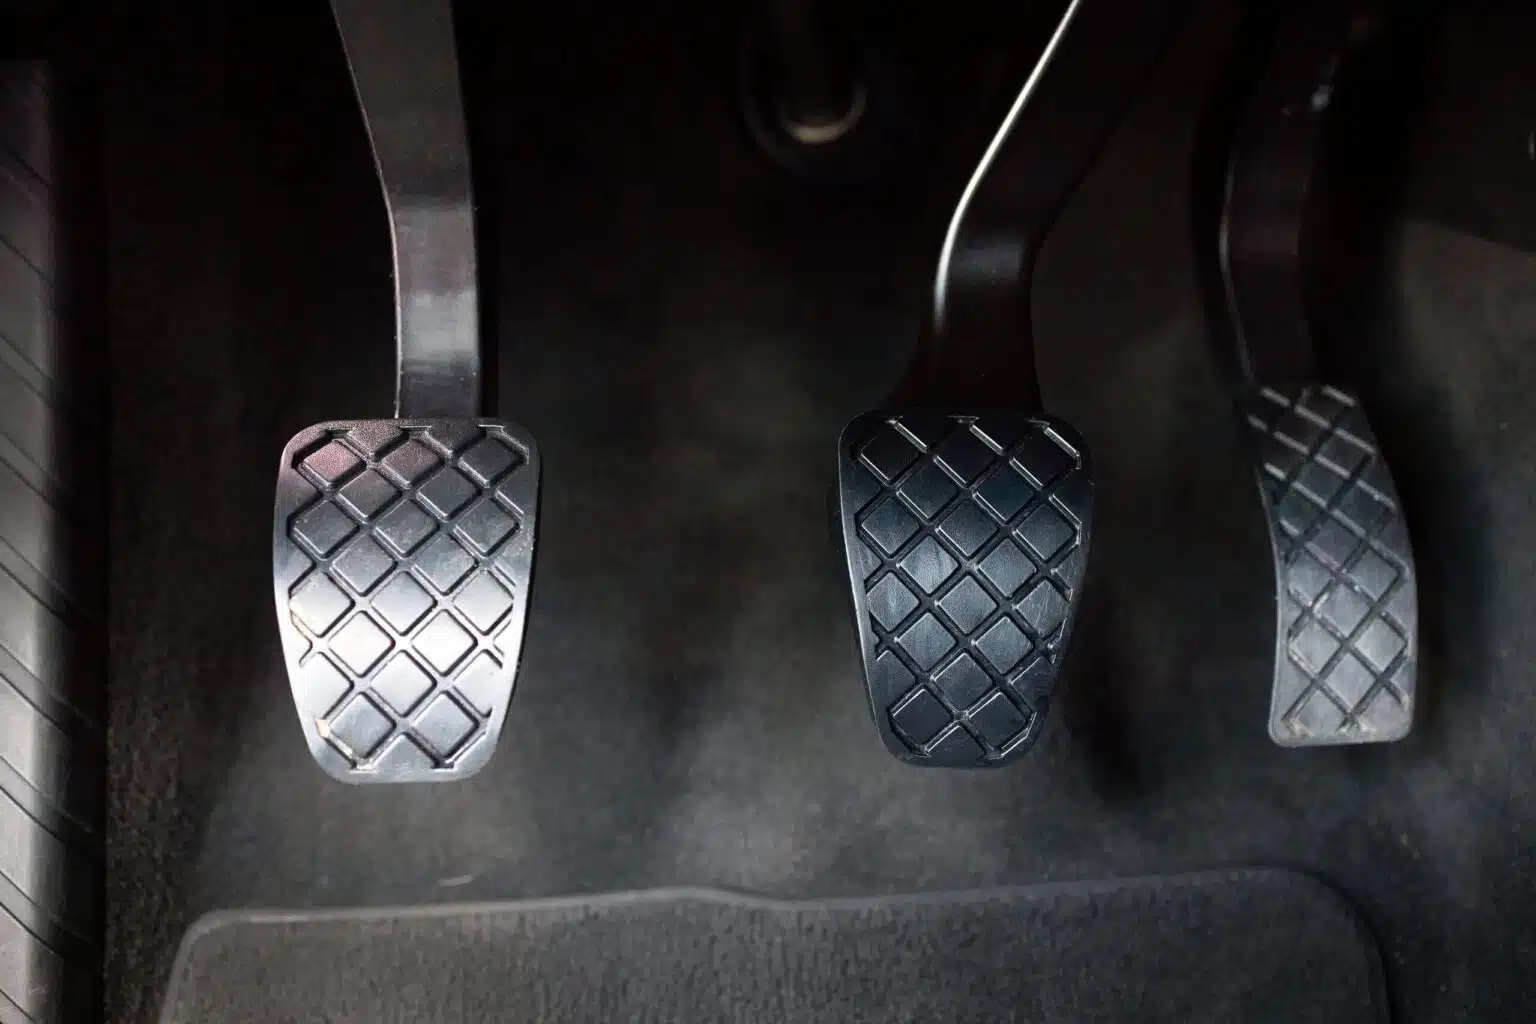 The Most Common Pedals Found in a Vehicle